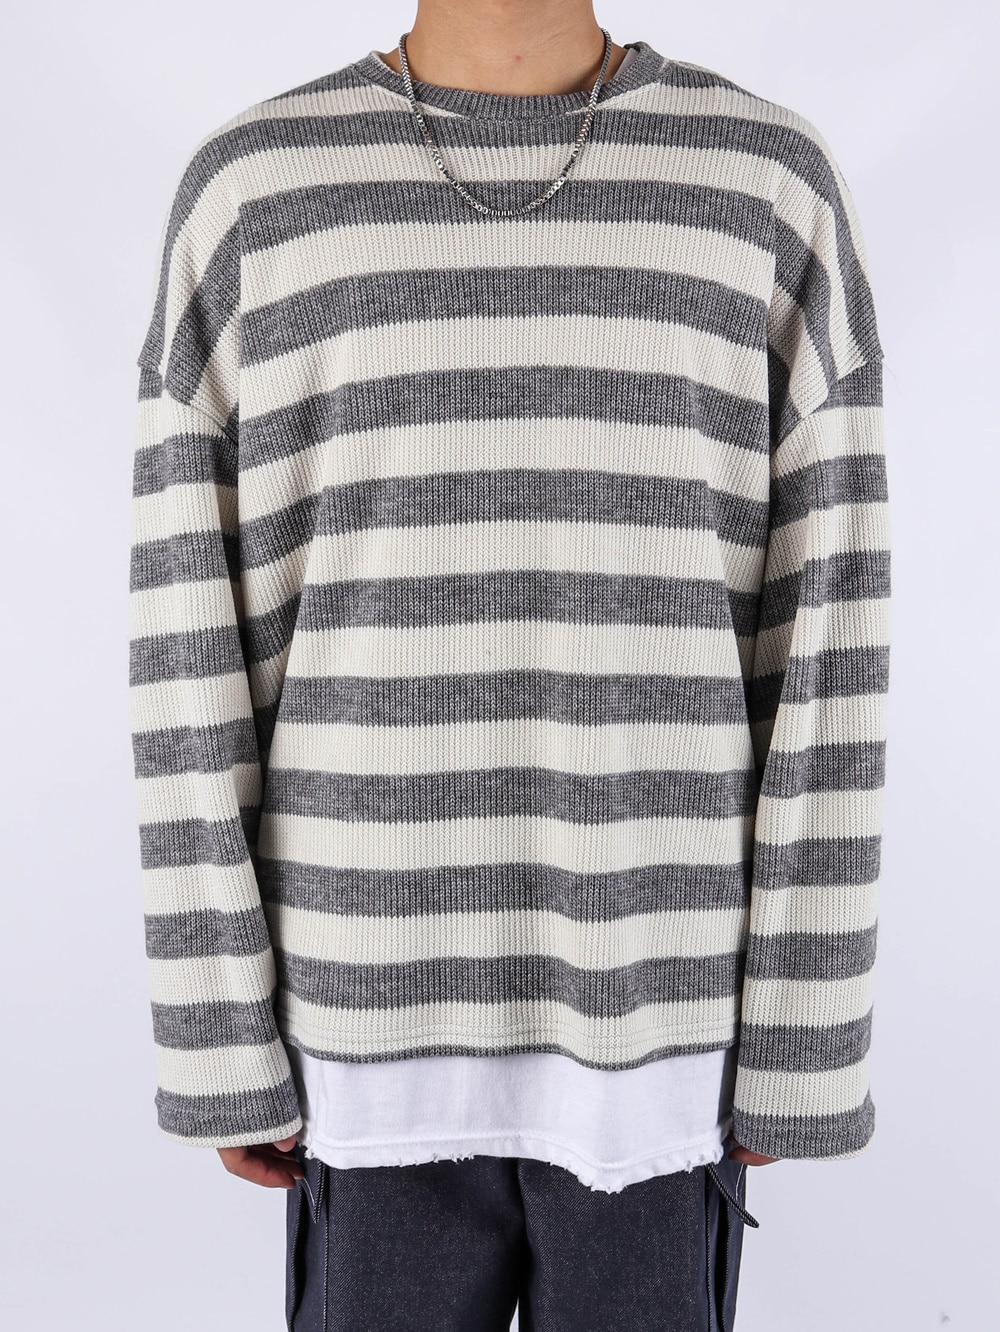 justyoung-LD Stripe Over Knit (2color)♡韓國男裝上衣